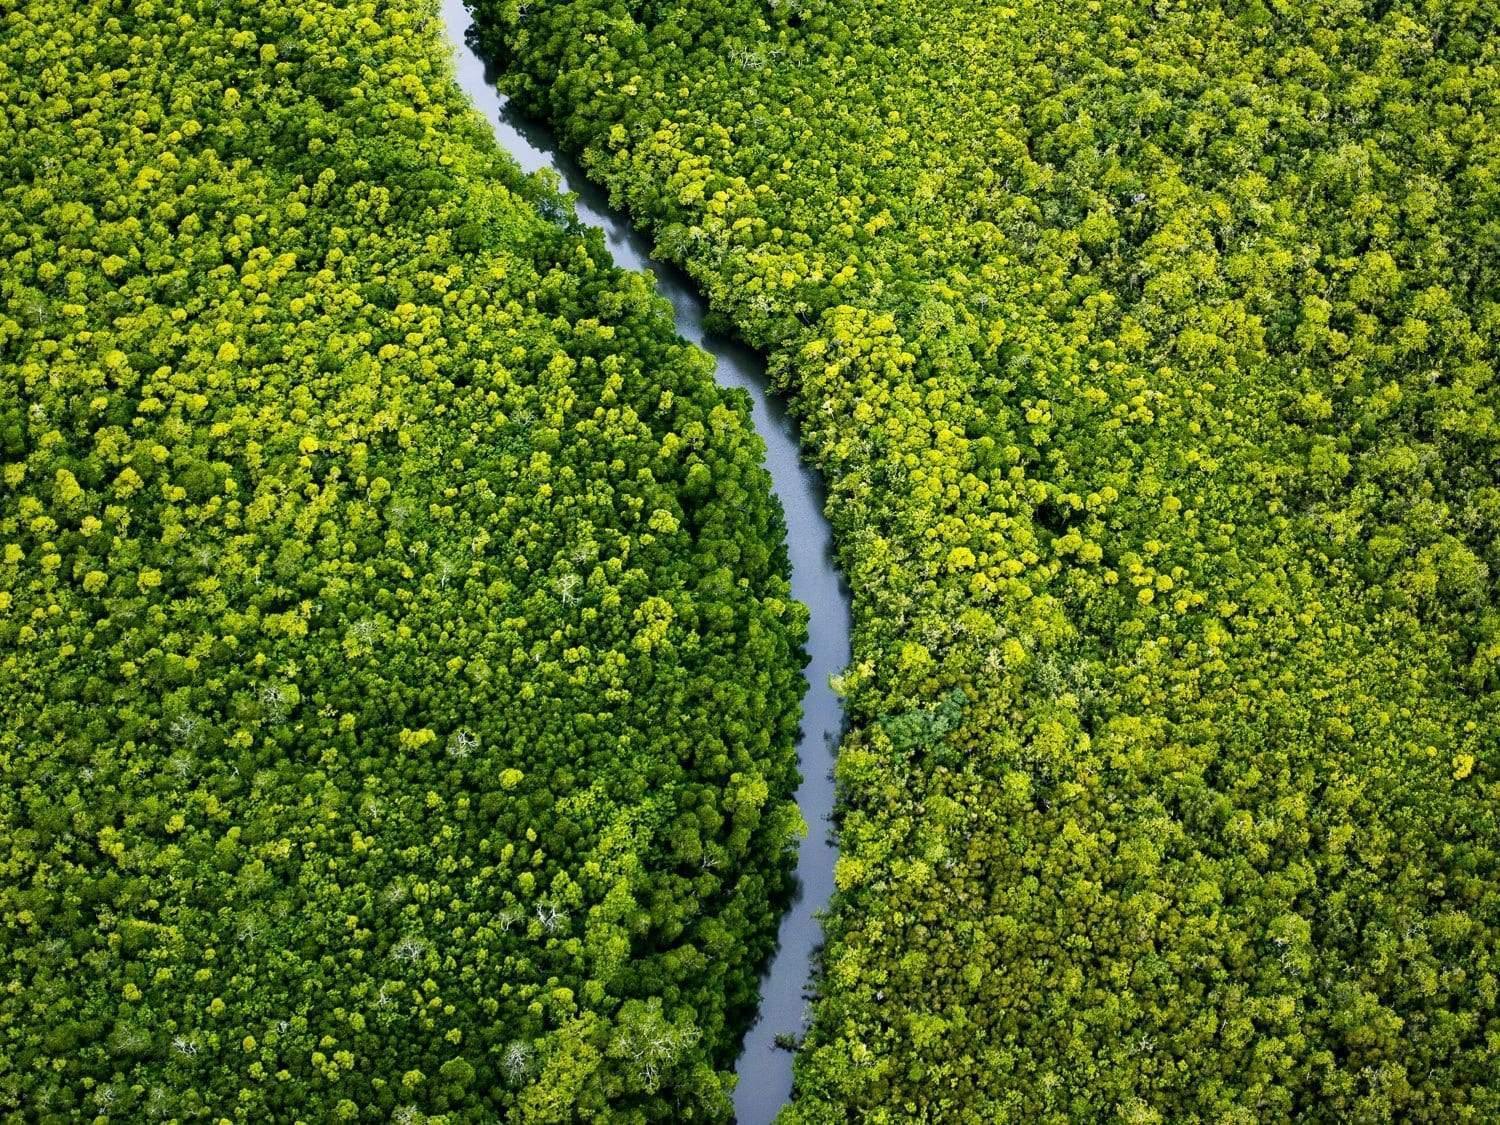 Aerial view of a greenery land with a curvy line of water in between, Pathway Home